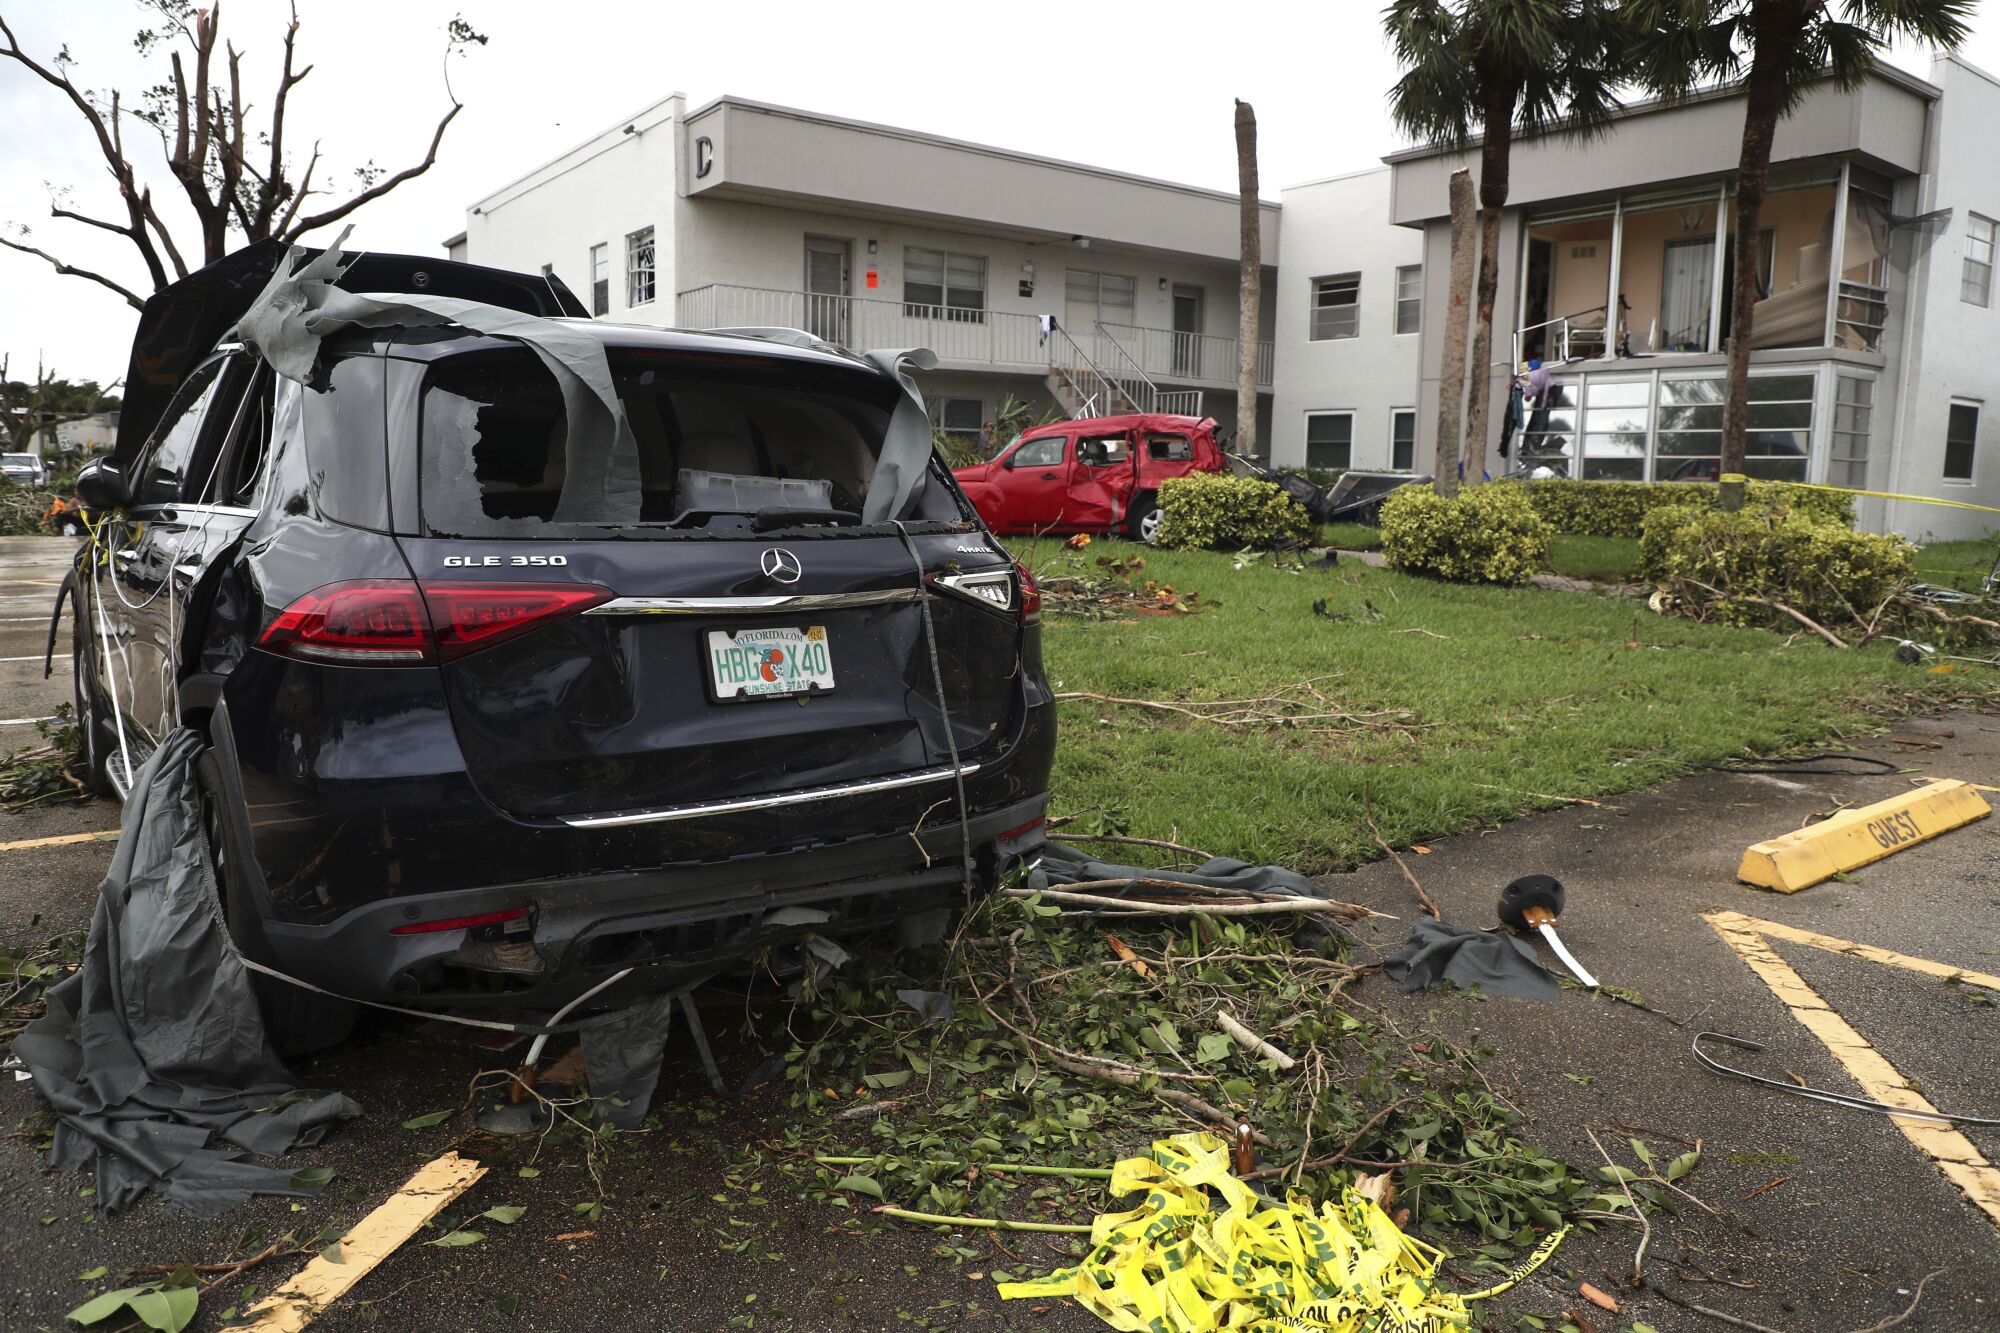 Cars damaged by an apparent overnight tornado in Delray Beach, Florida.